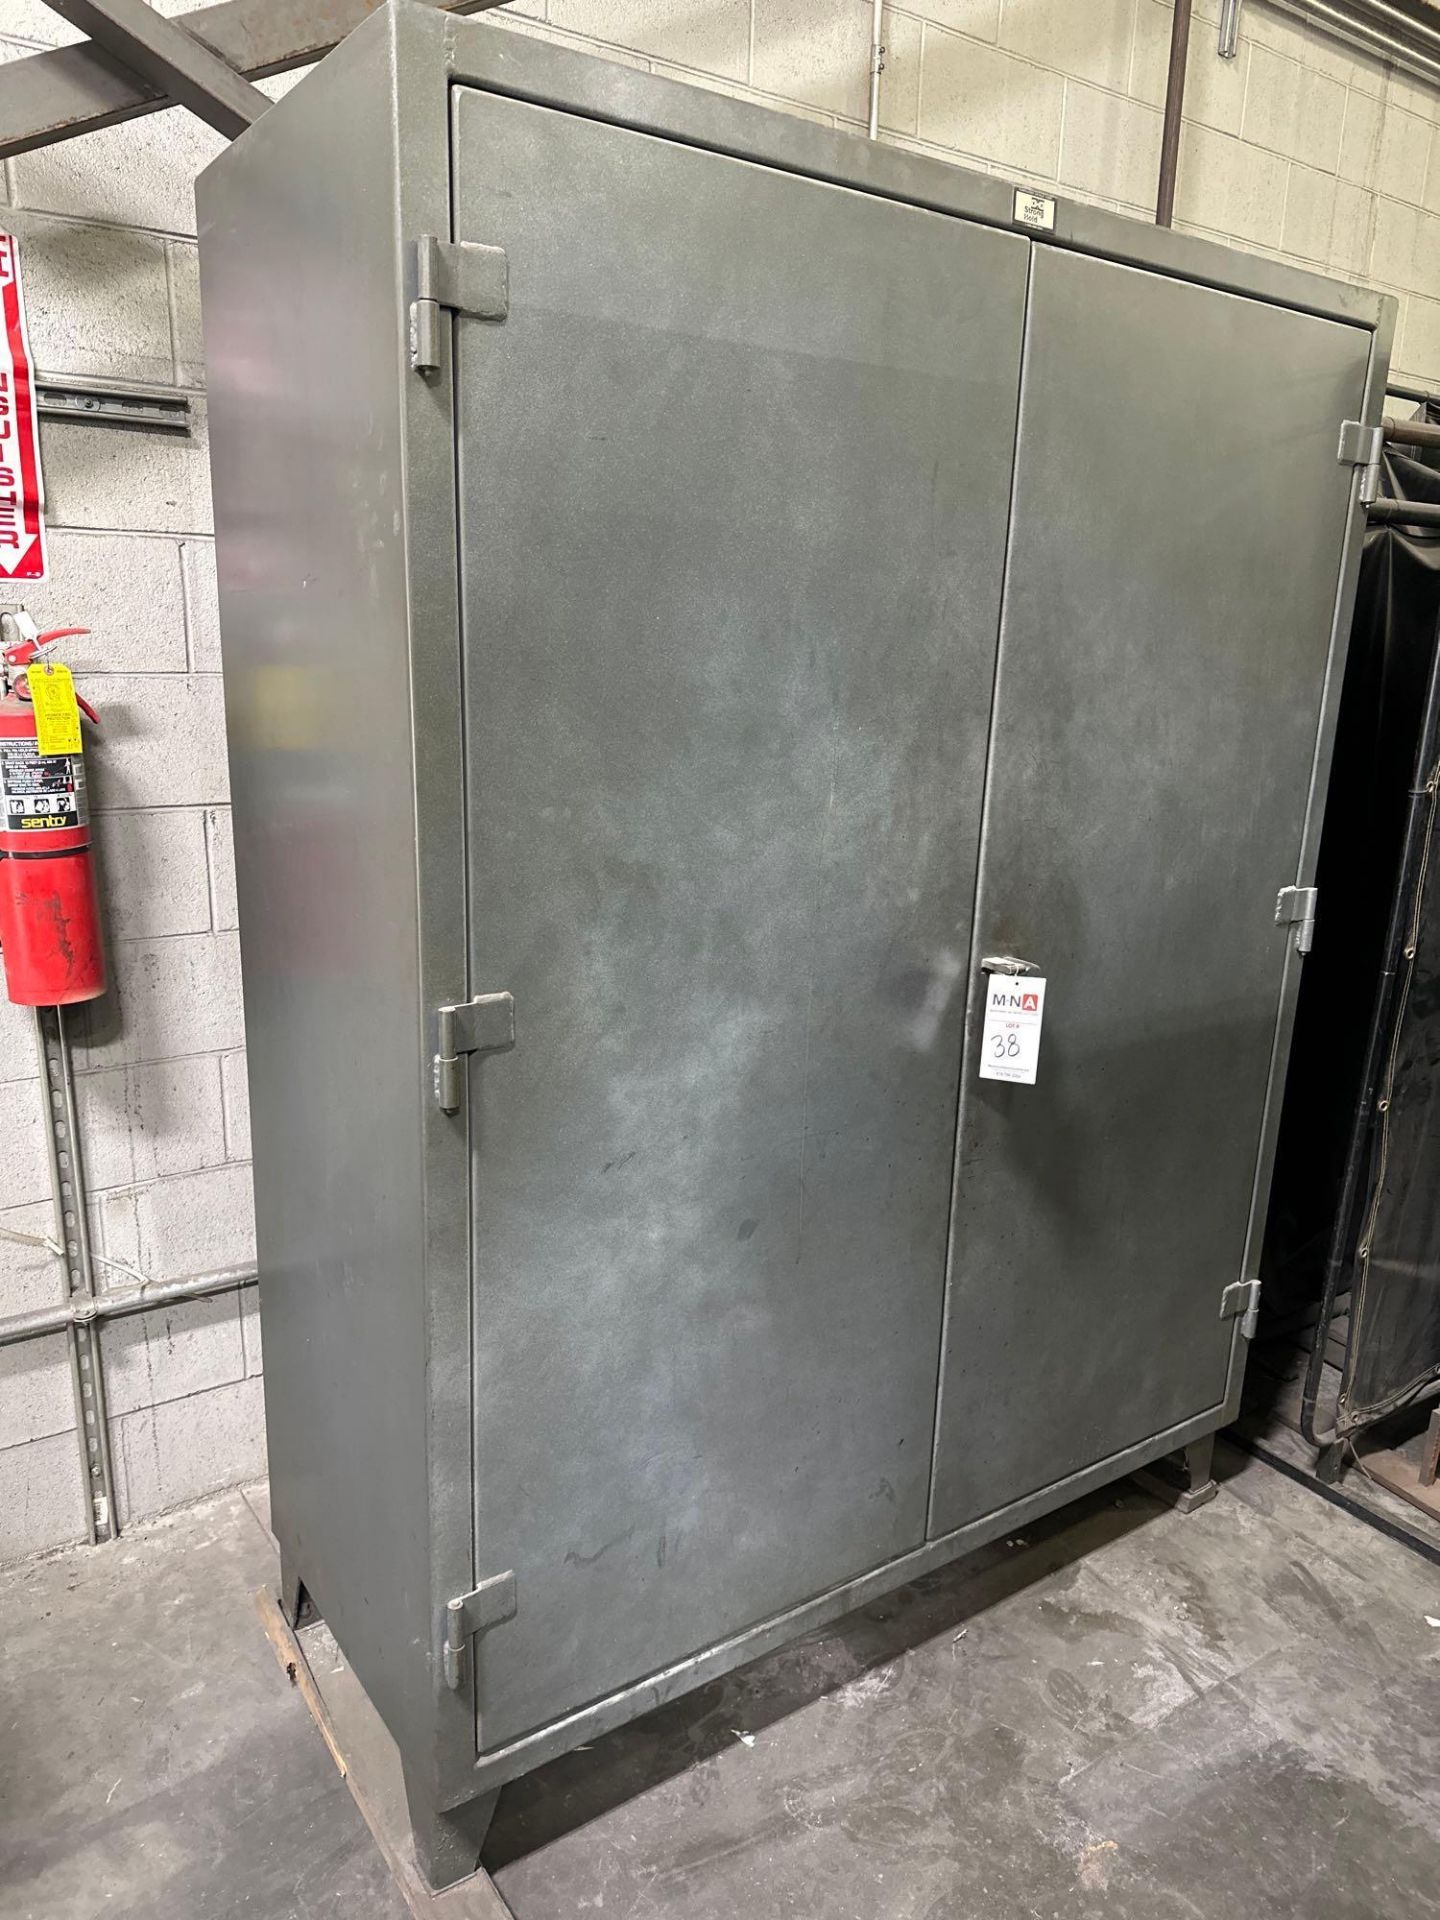 2 Door Steel Cabinet w/ Pipe Elbows, Reducers, Plugs, Quick Disconnects, Straight Threads, Shut Off